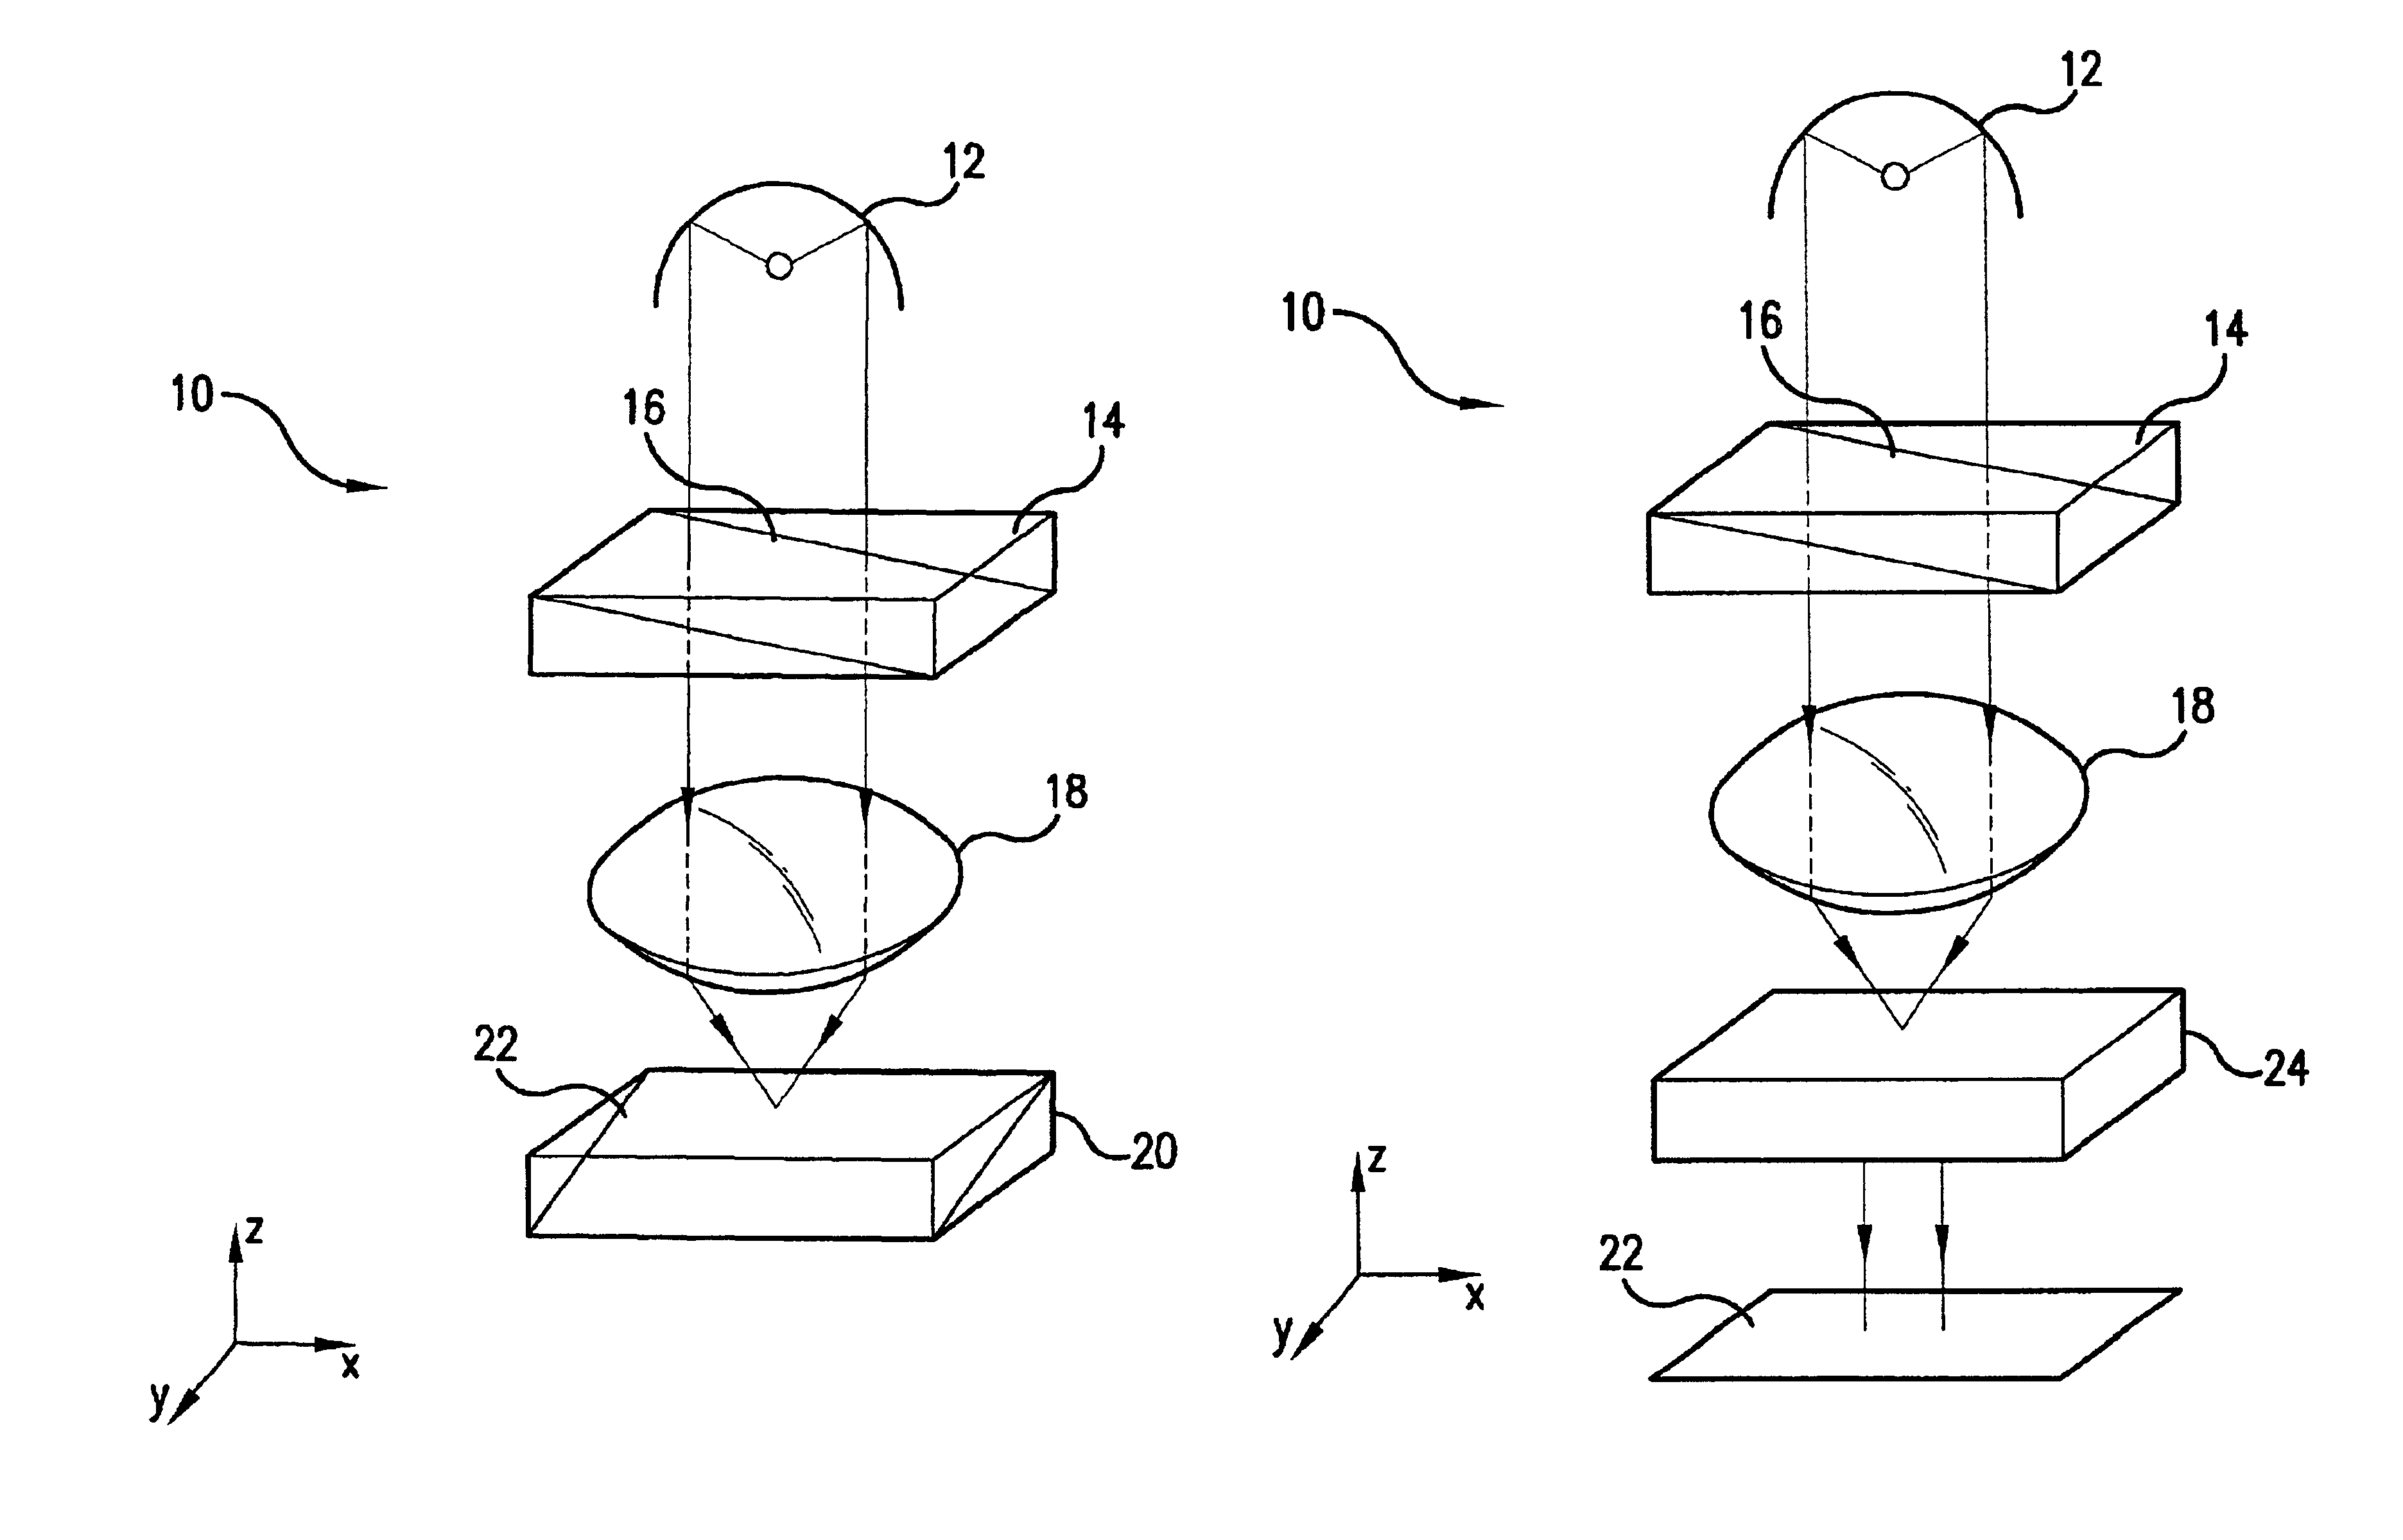 Method for characterizing optical systems using holographic reticles